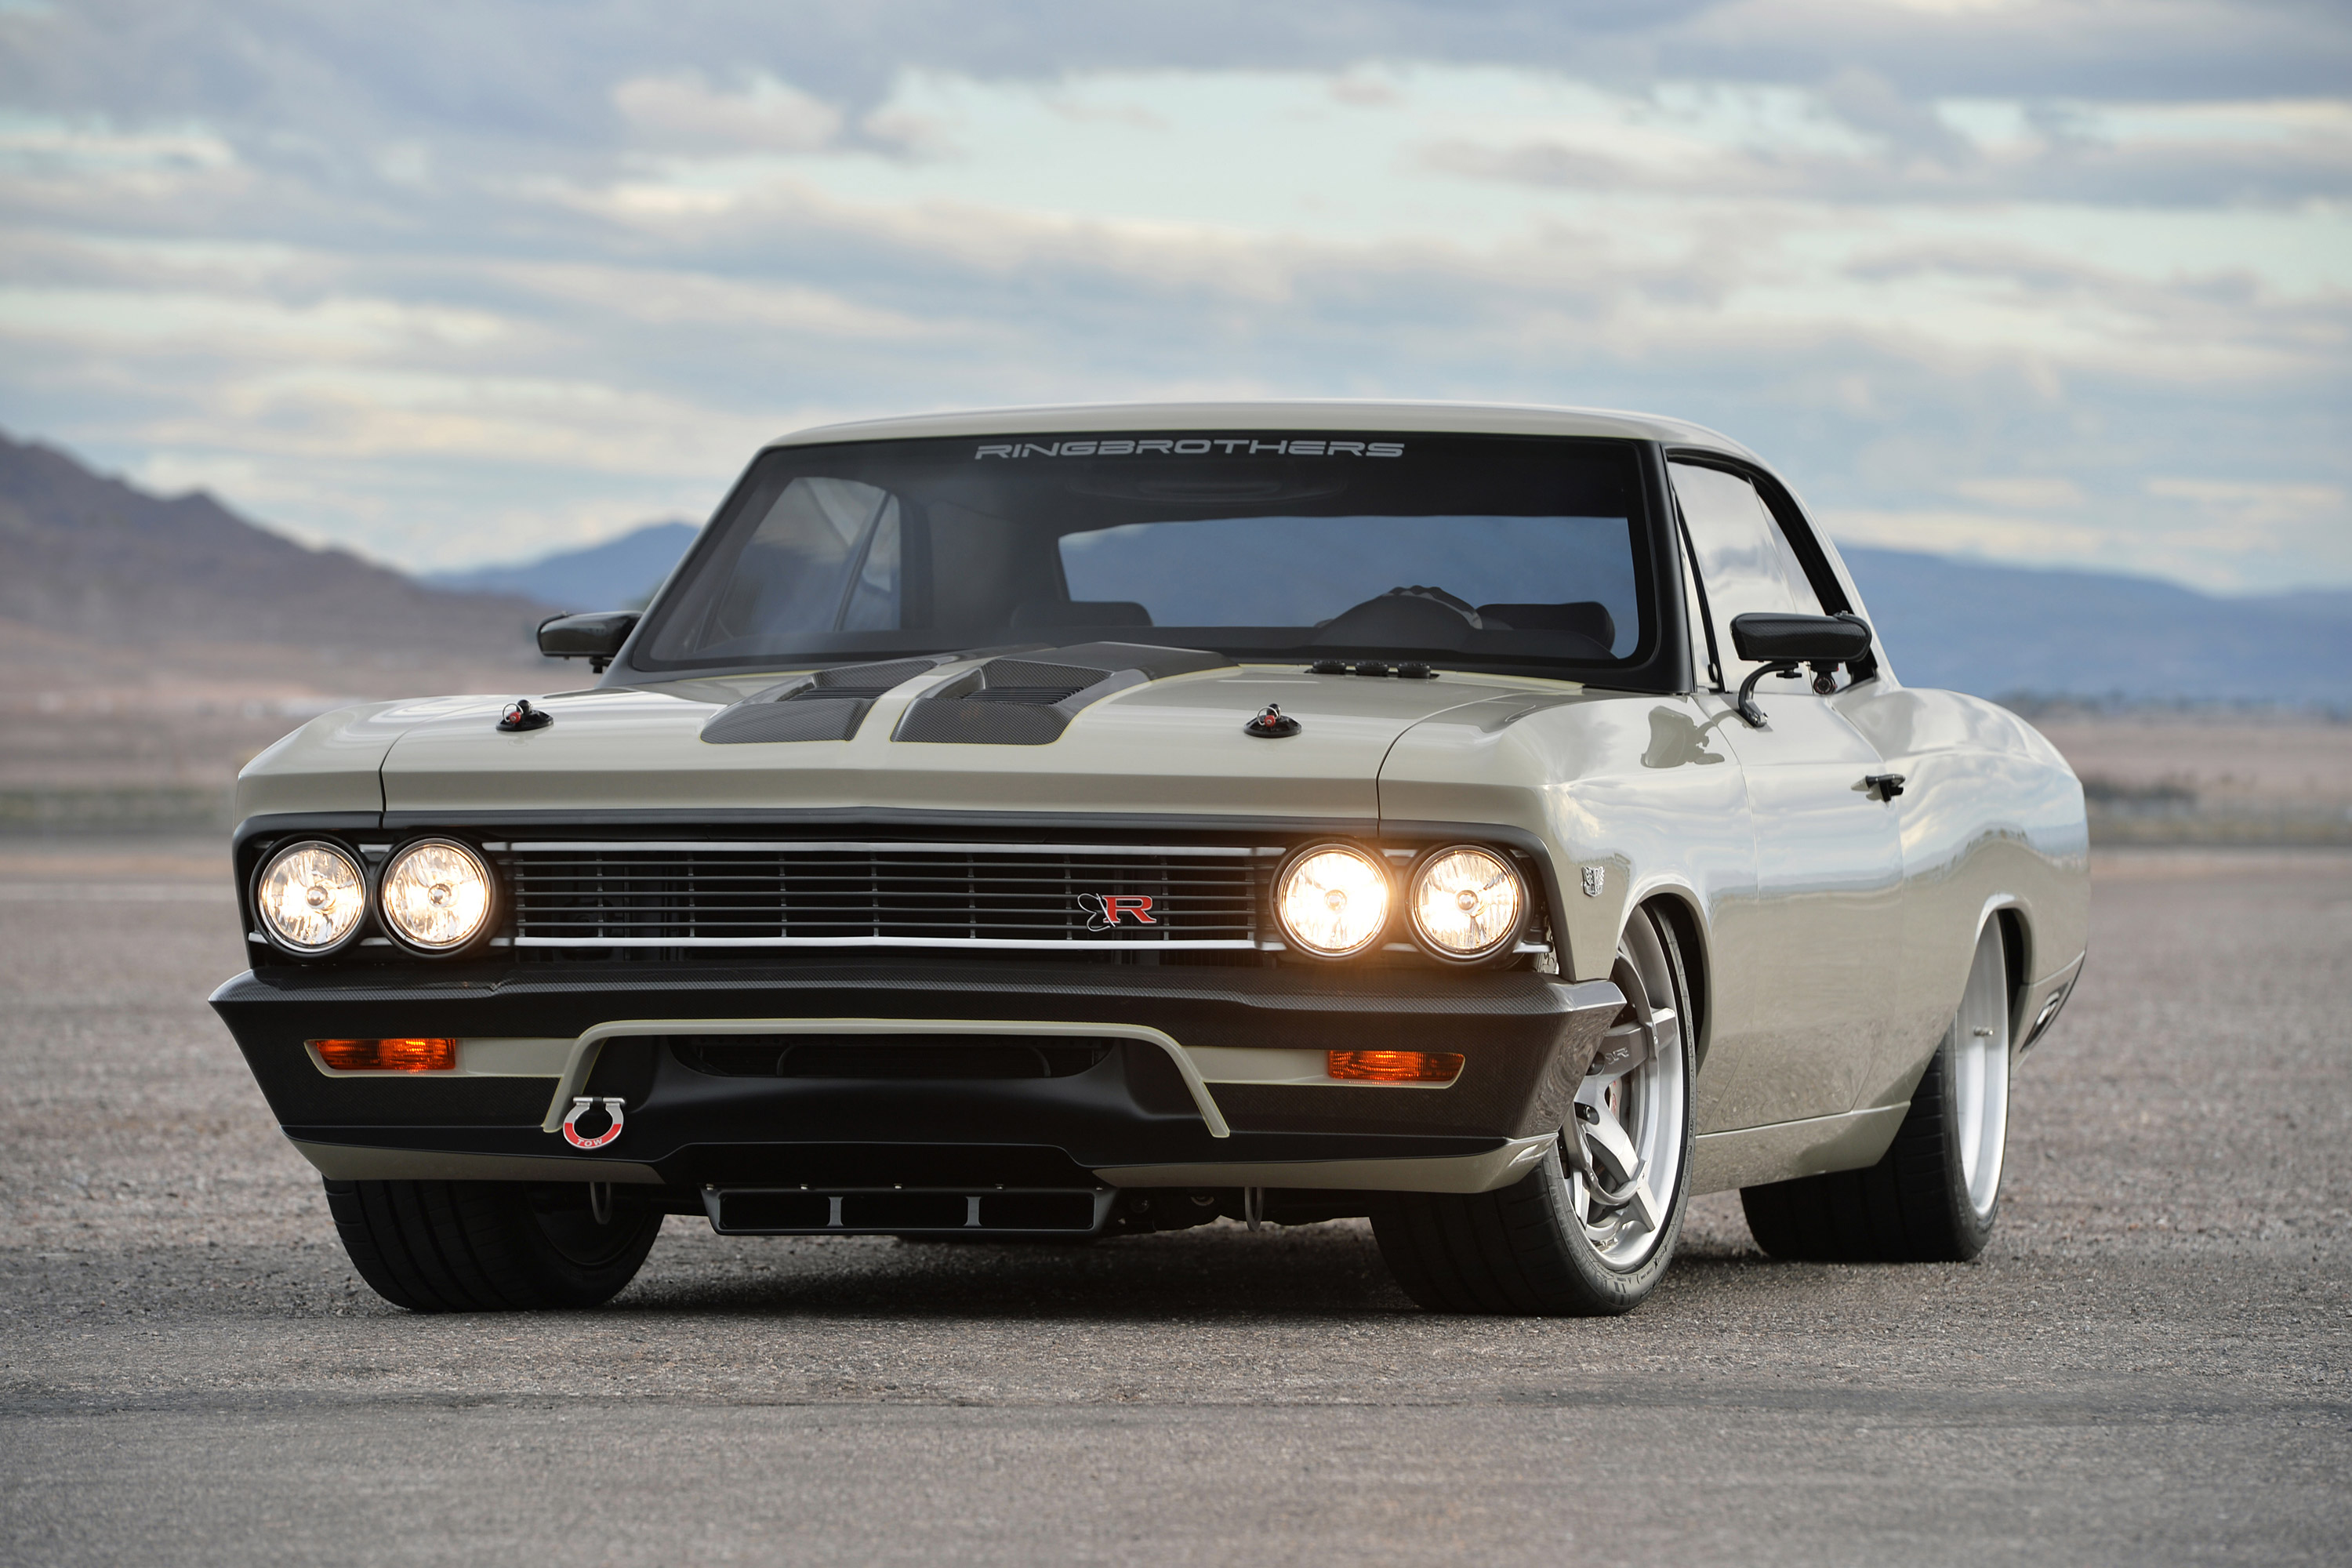 vehicles, chevrolet chevelle, beige car, car, chevrolet chevelle recoil, muscle car, ringbrothers, chevrolet 4K